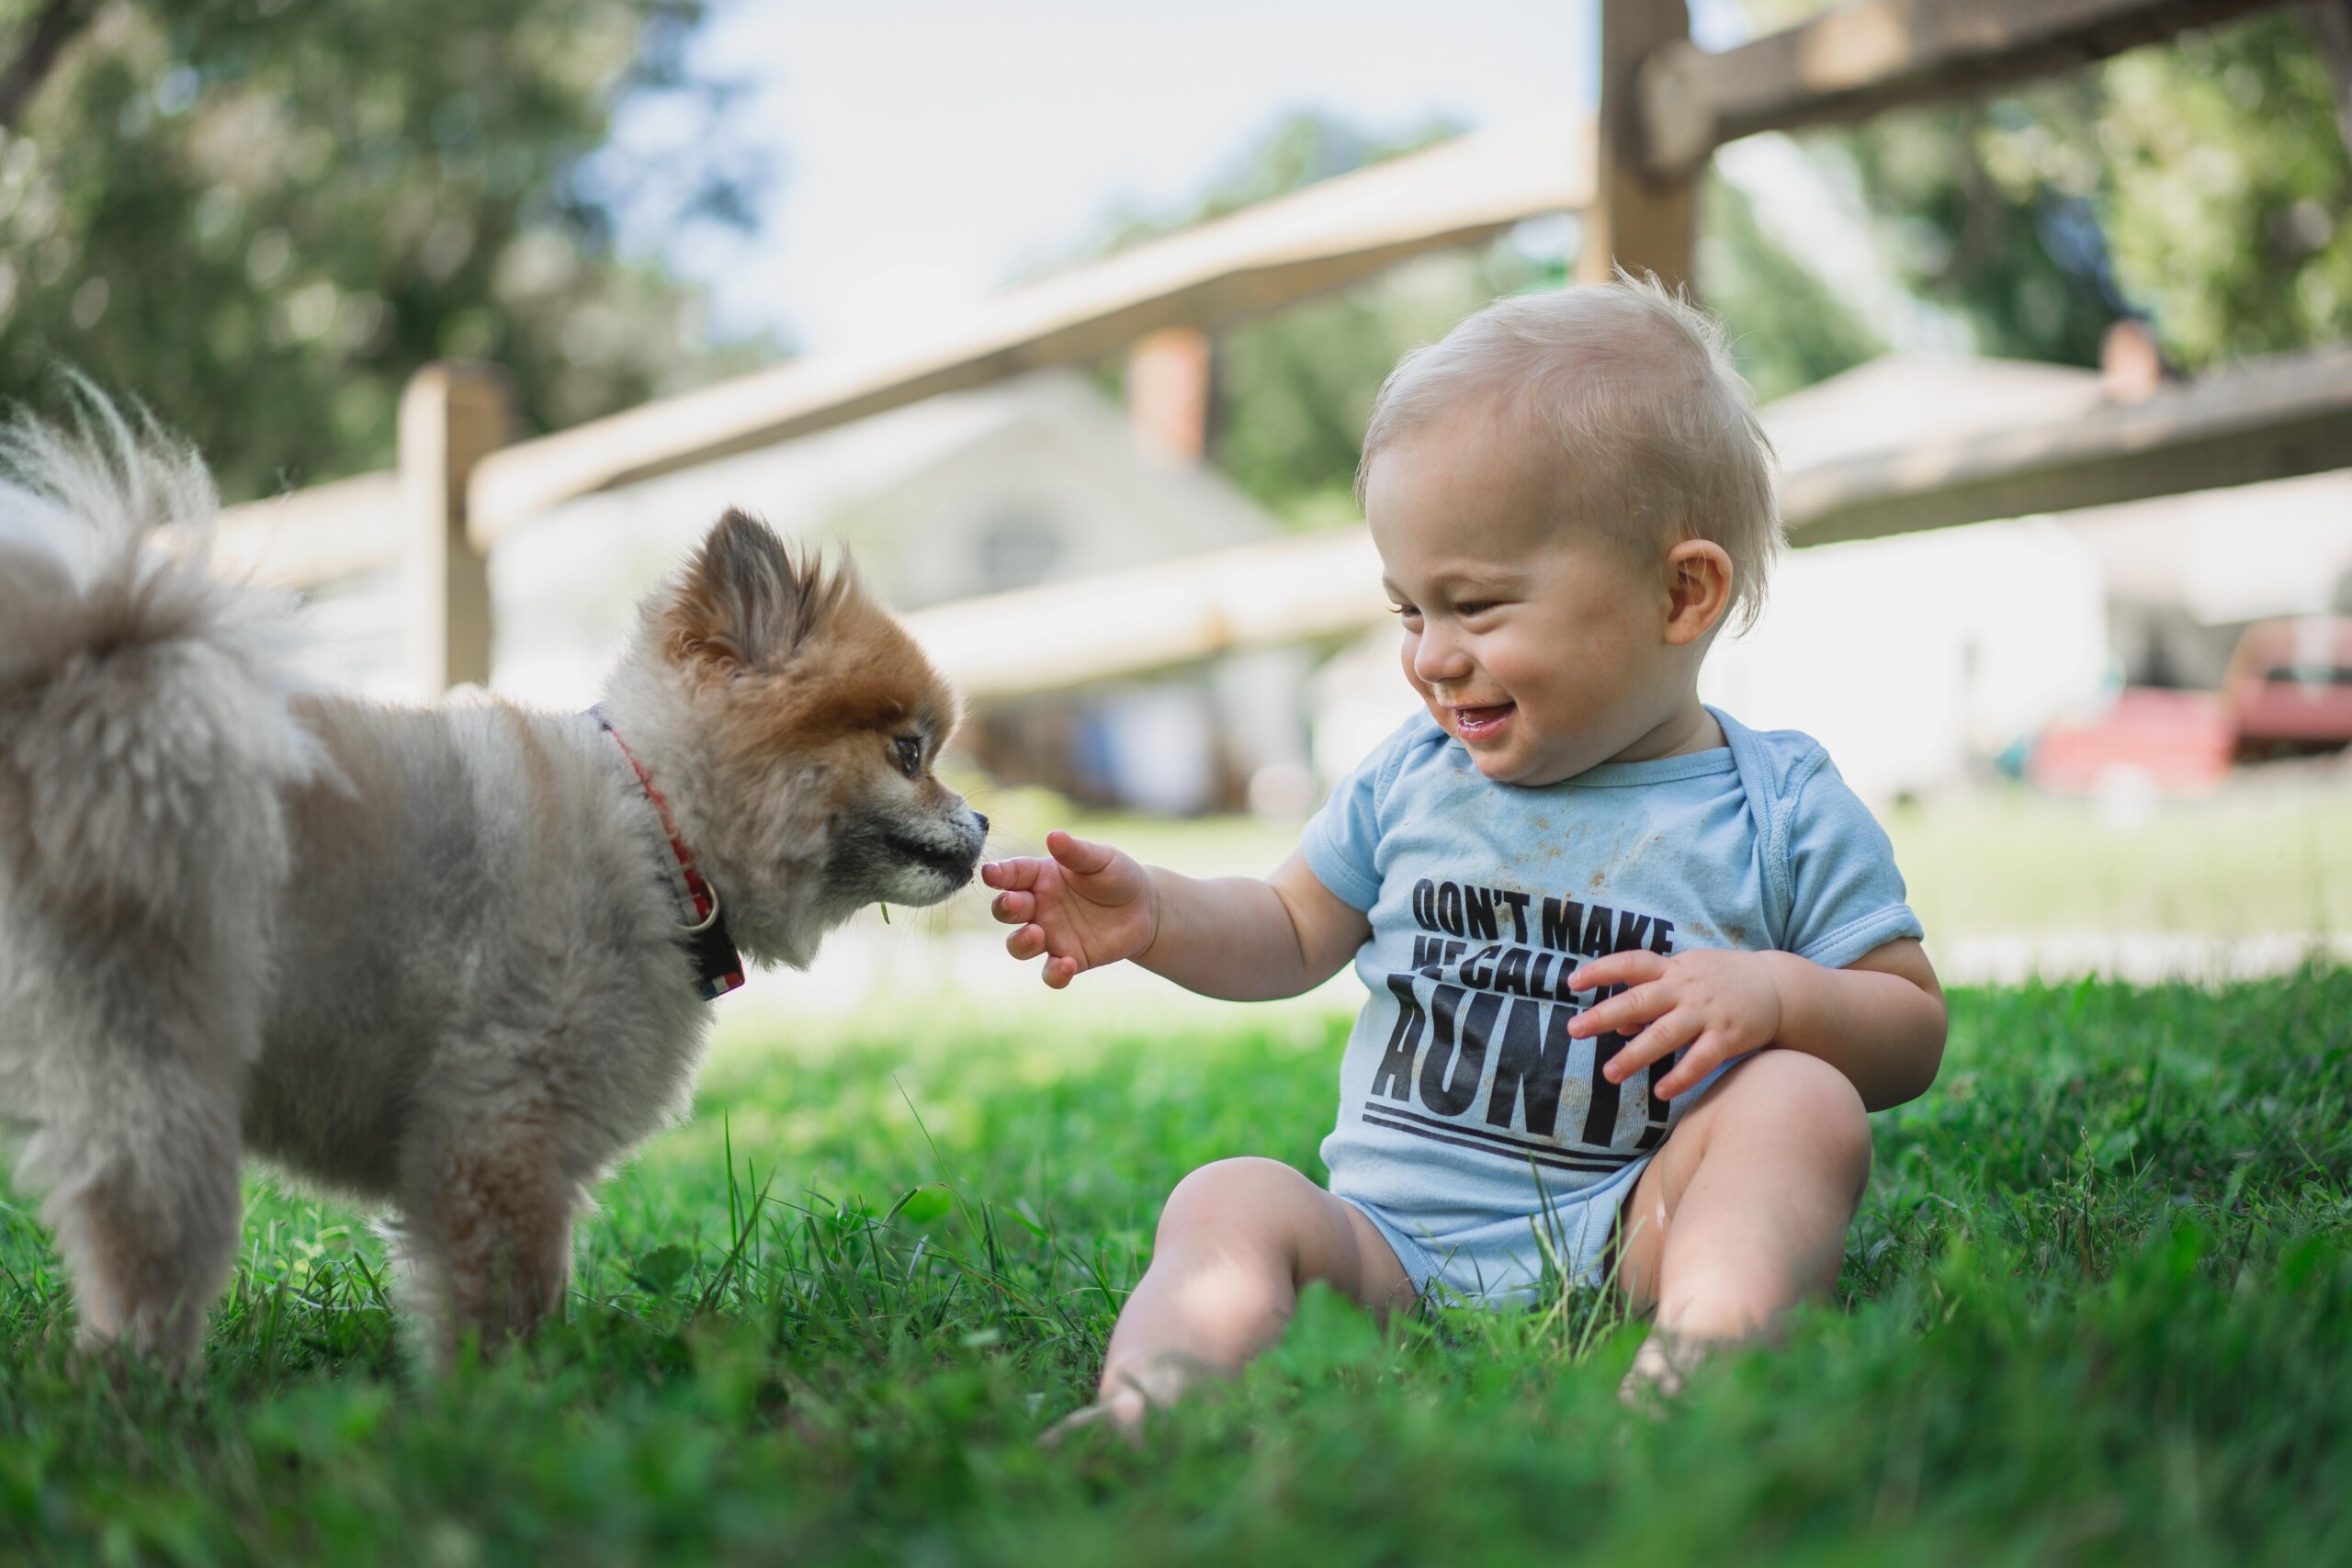 How to find joy in introducing your new pets to kids